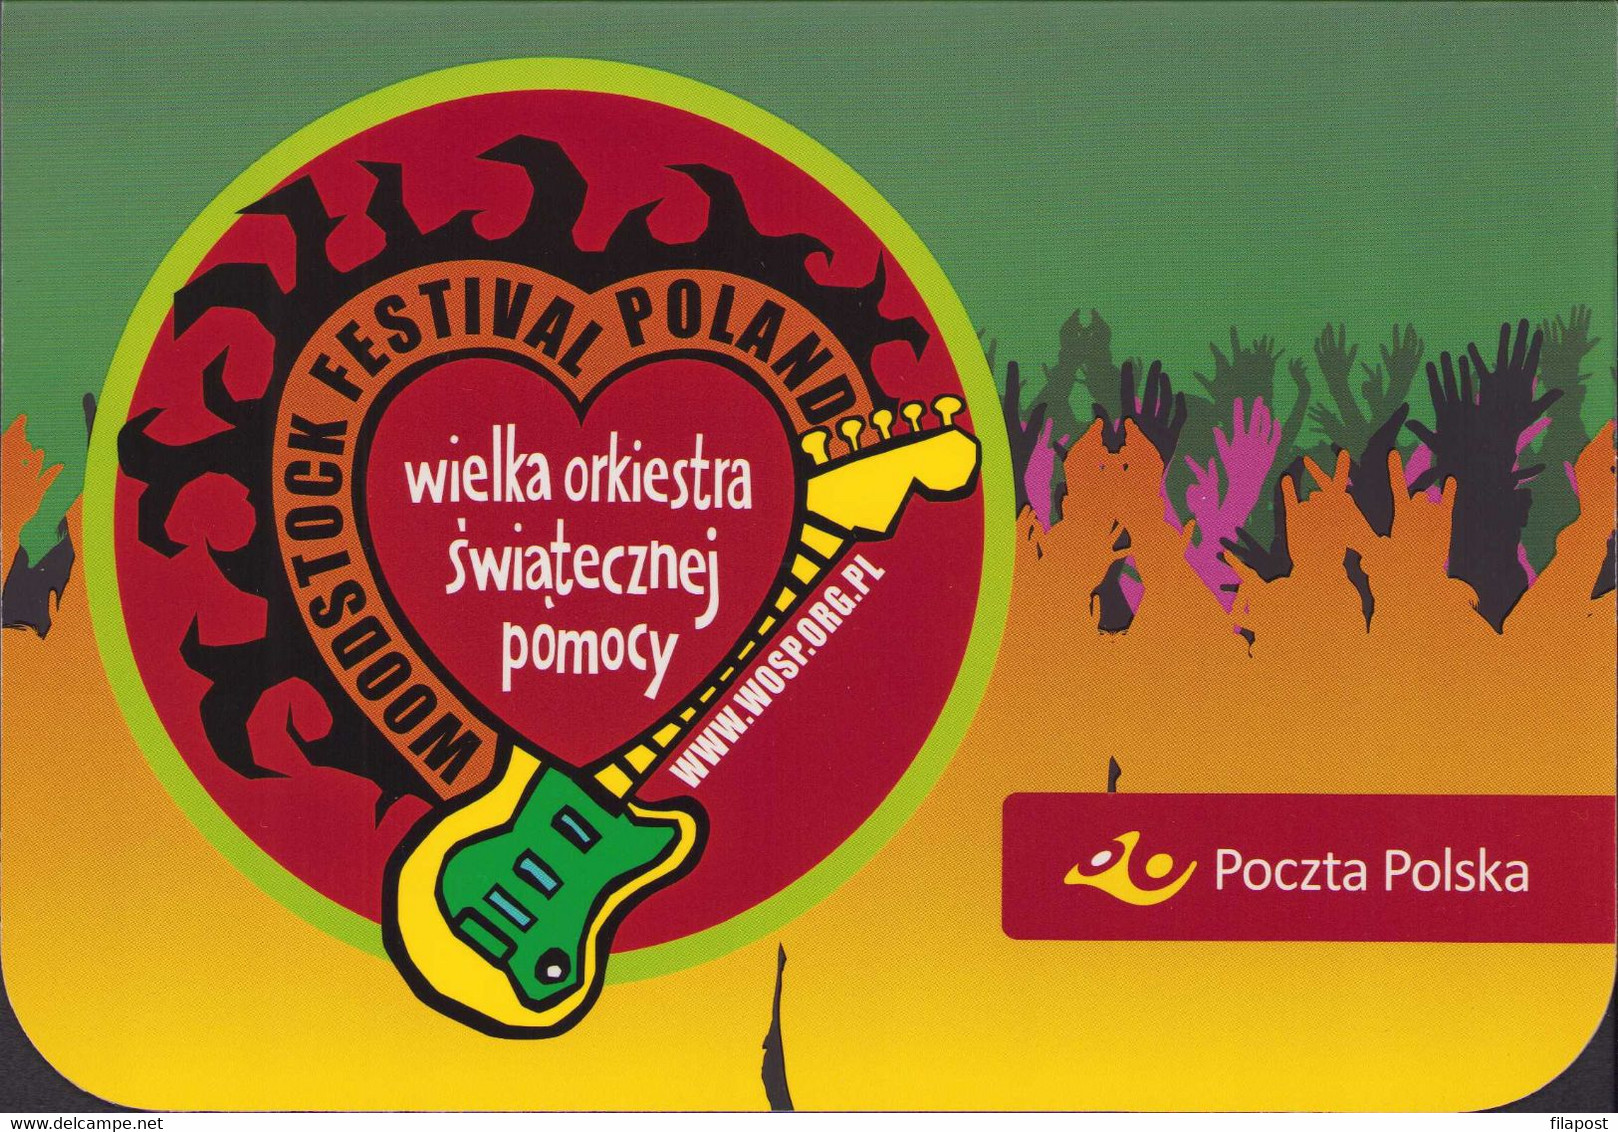 POLAND 2013 Souvenir Mini Booklet / Woodstock Festival, Music, Art, Event, Stage, Guitar / FDC + Stamp  MNH **FV - Cuadernillos